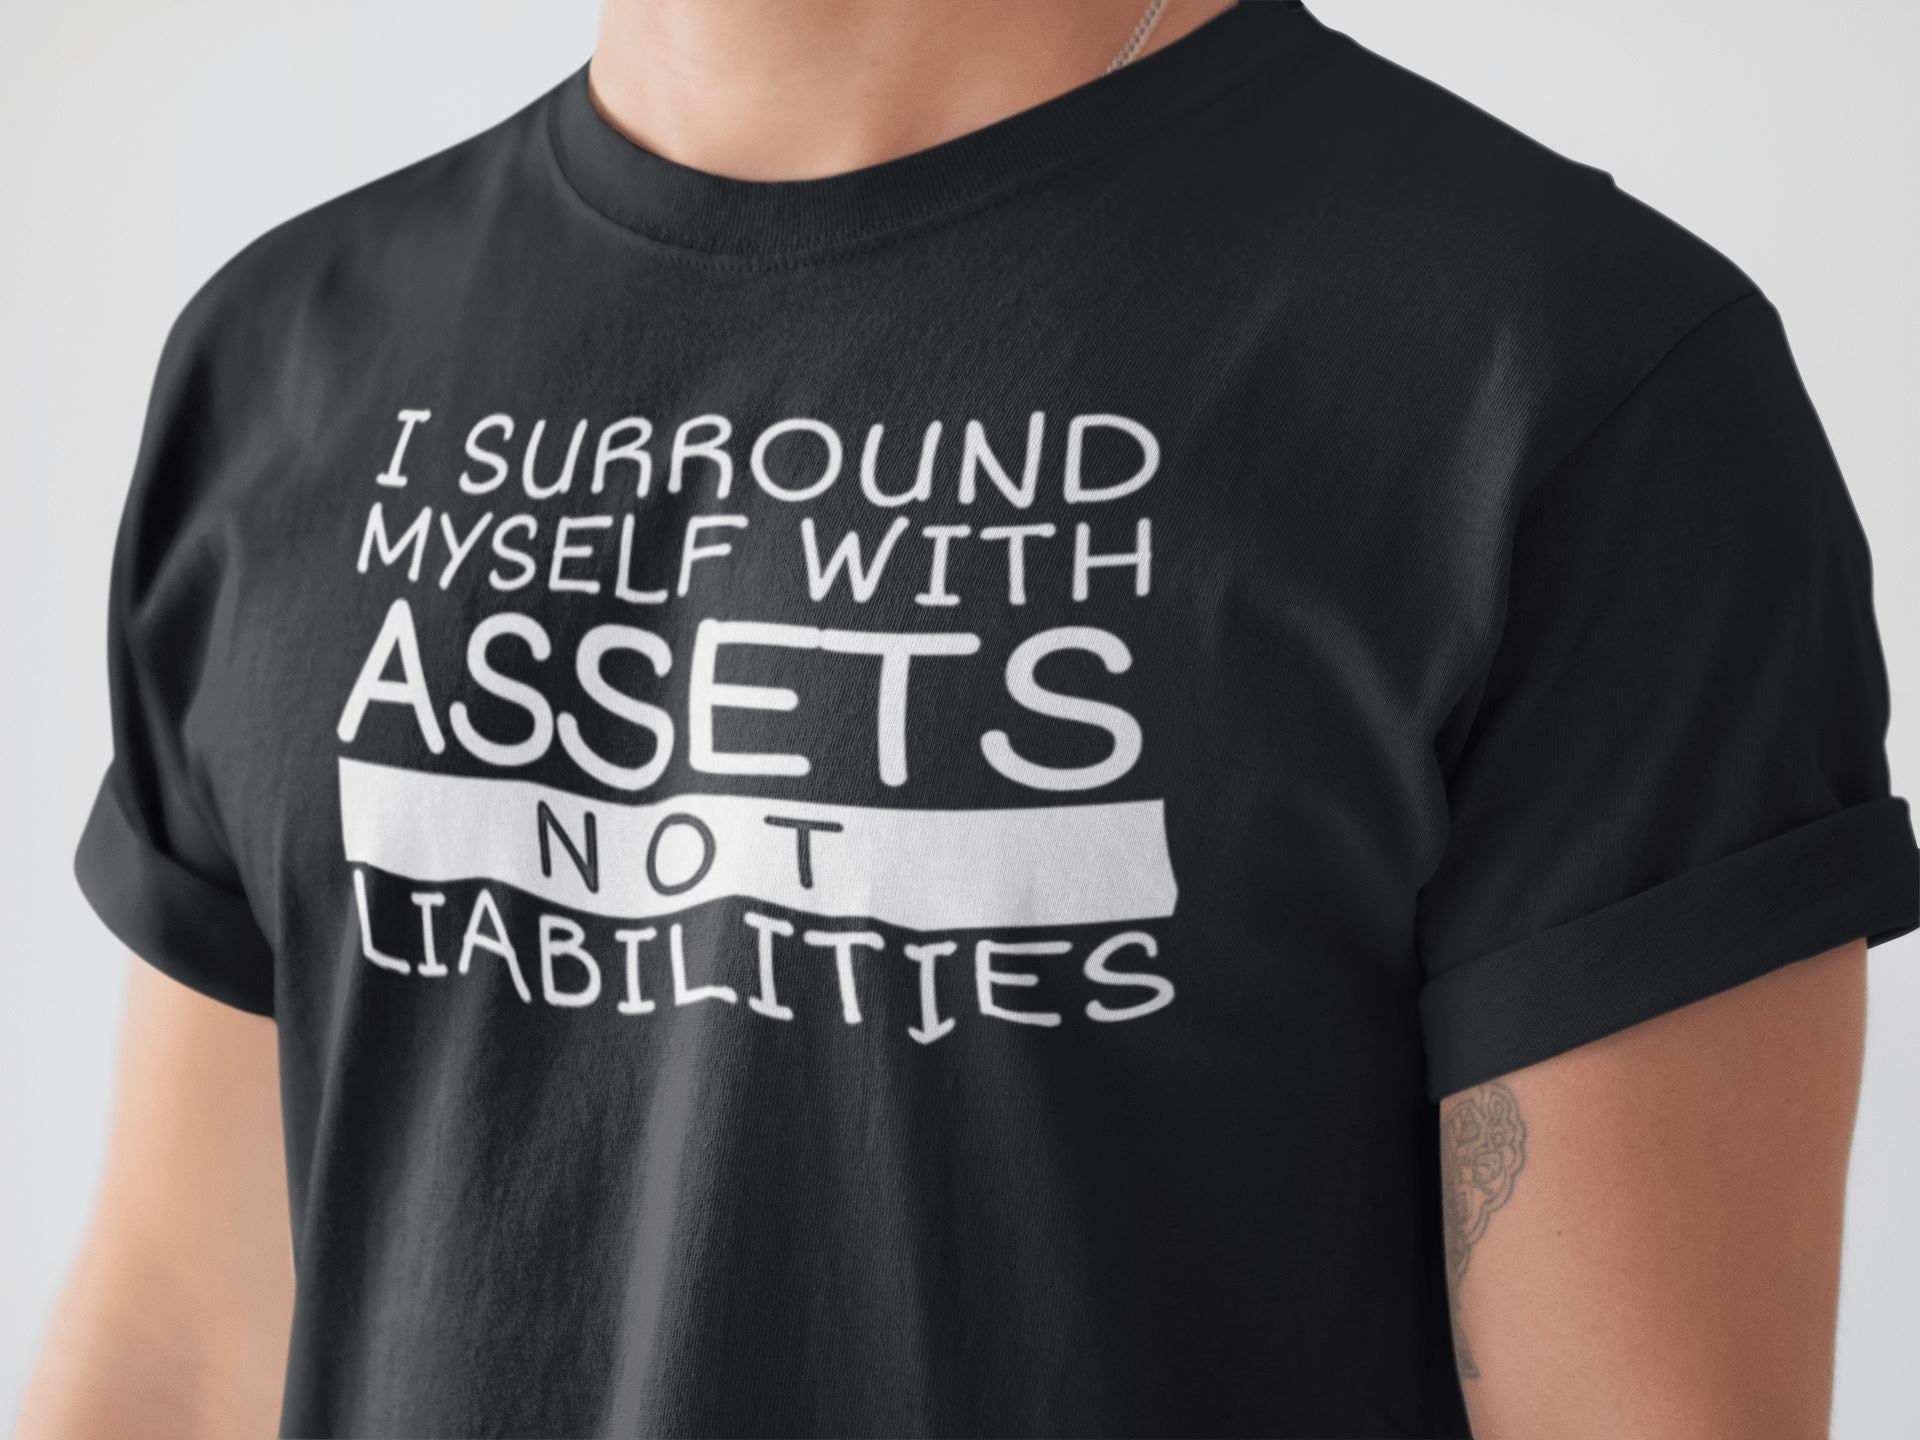 I Surround Myself with Assets Not Liabilities Special Black T Shirt for Men and Women - Catch My Drift India  black, clothing, general, made in india, shirt, stock market, t shirt, trader, tr